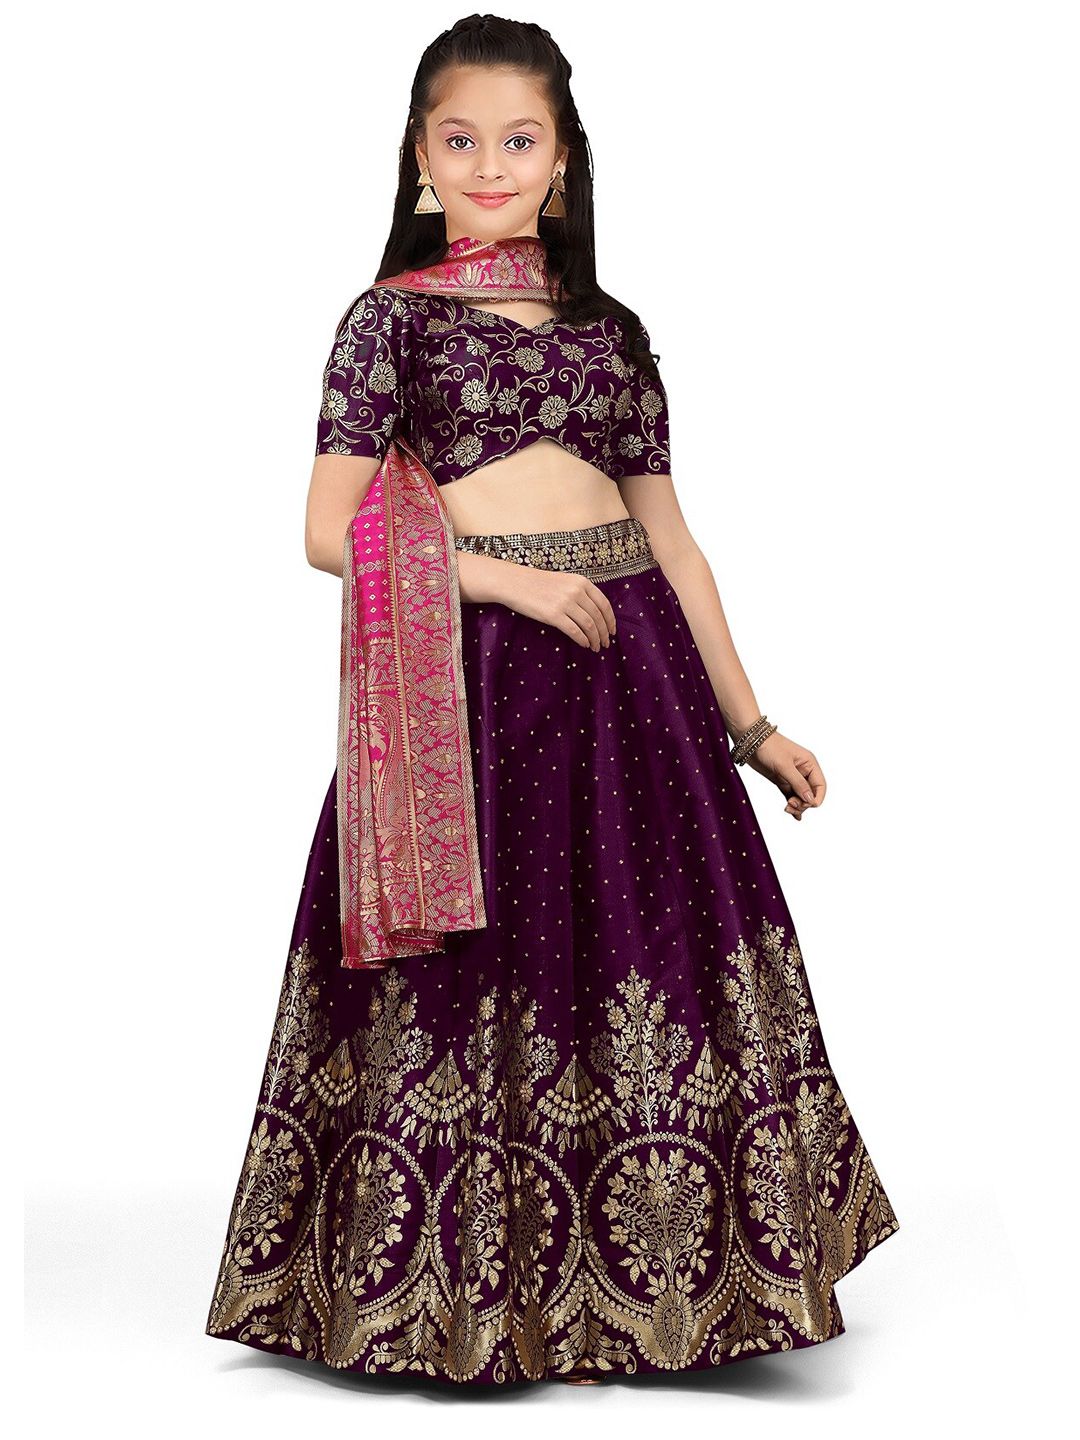 Kedar Fab Girls Beads and Stones Semi-Stitched Lehenga & Unstitched Blouse With Dupatta Price in India